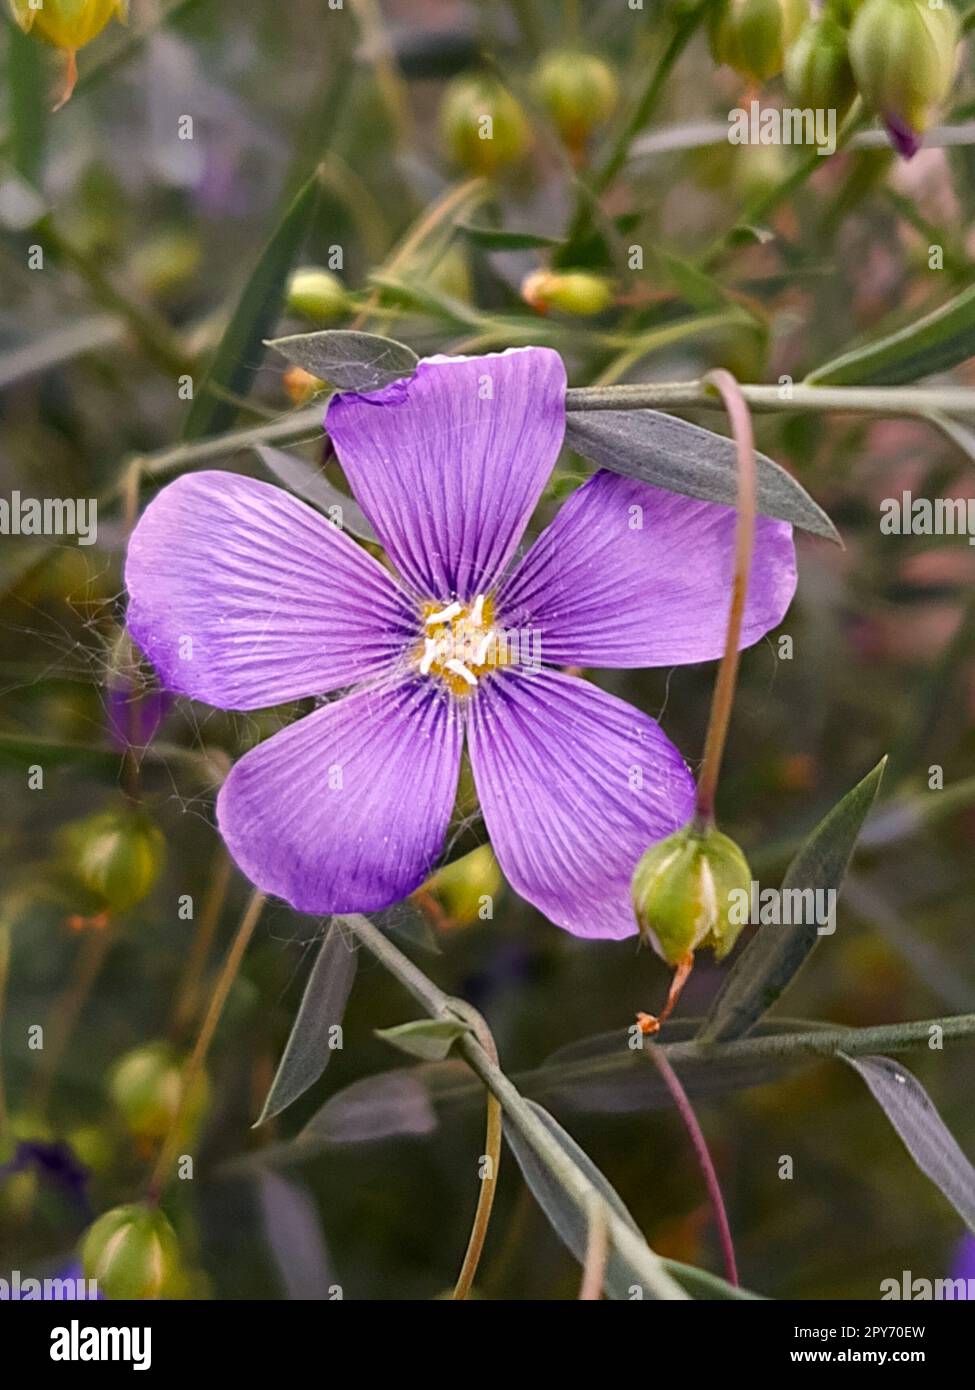 Lewis flax flower on a background of leaves close-up Stock Photo